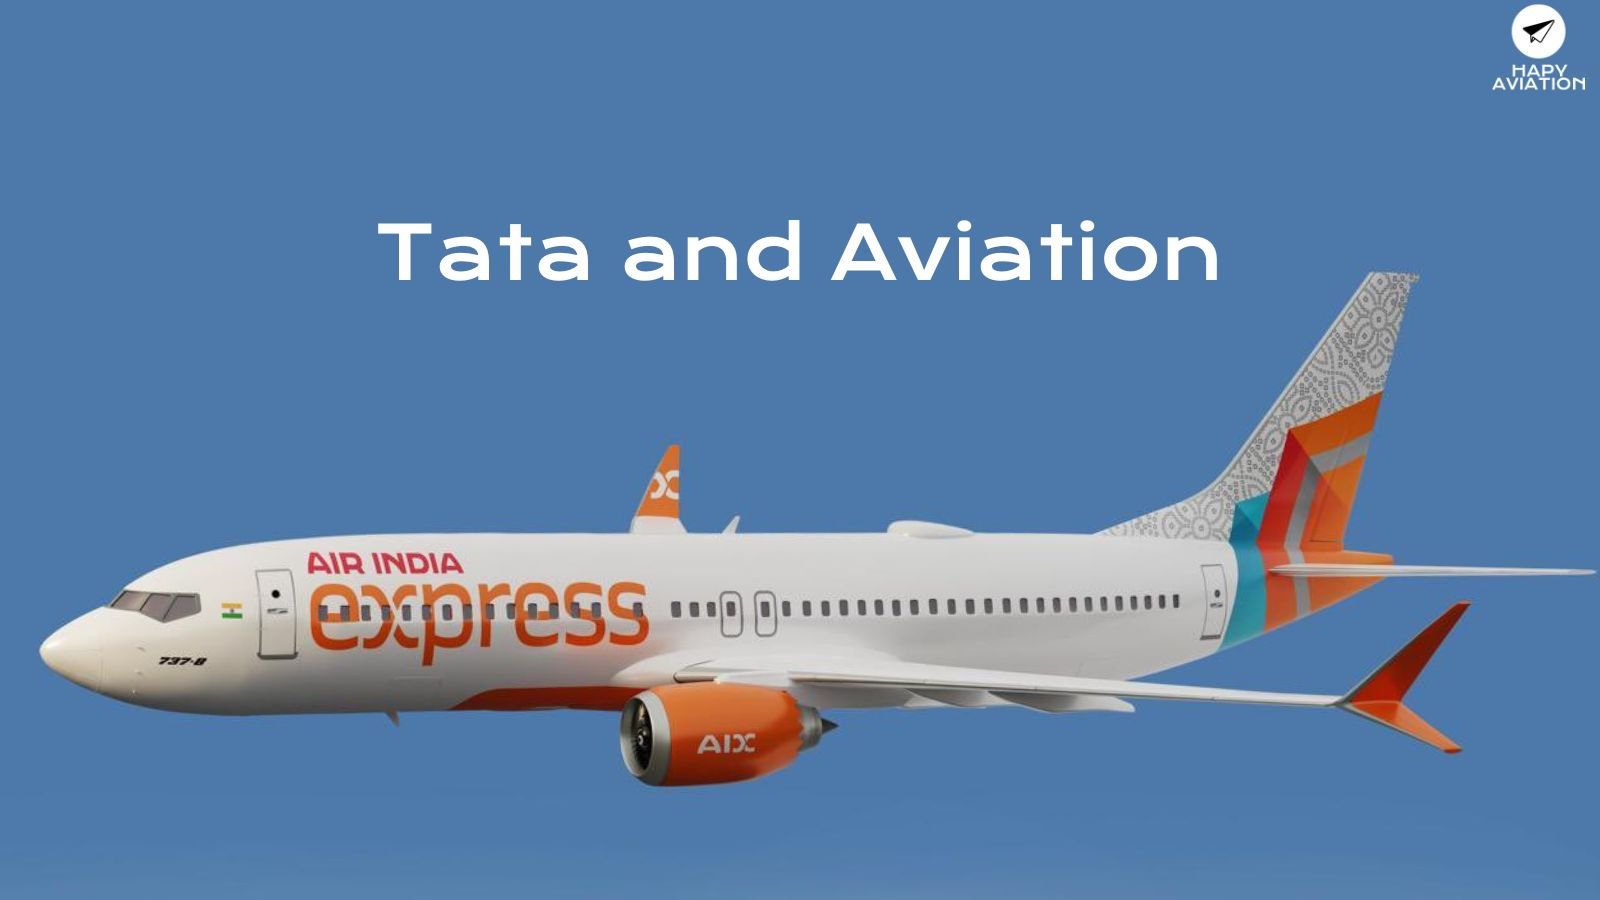 Tata Group and its Airlines are Reshaping the Travel Experience